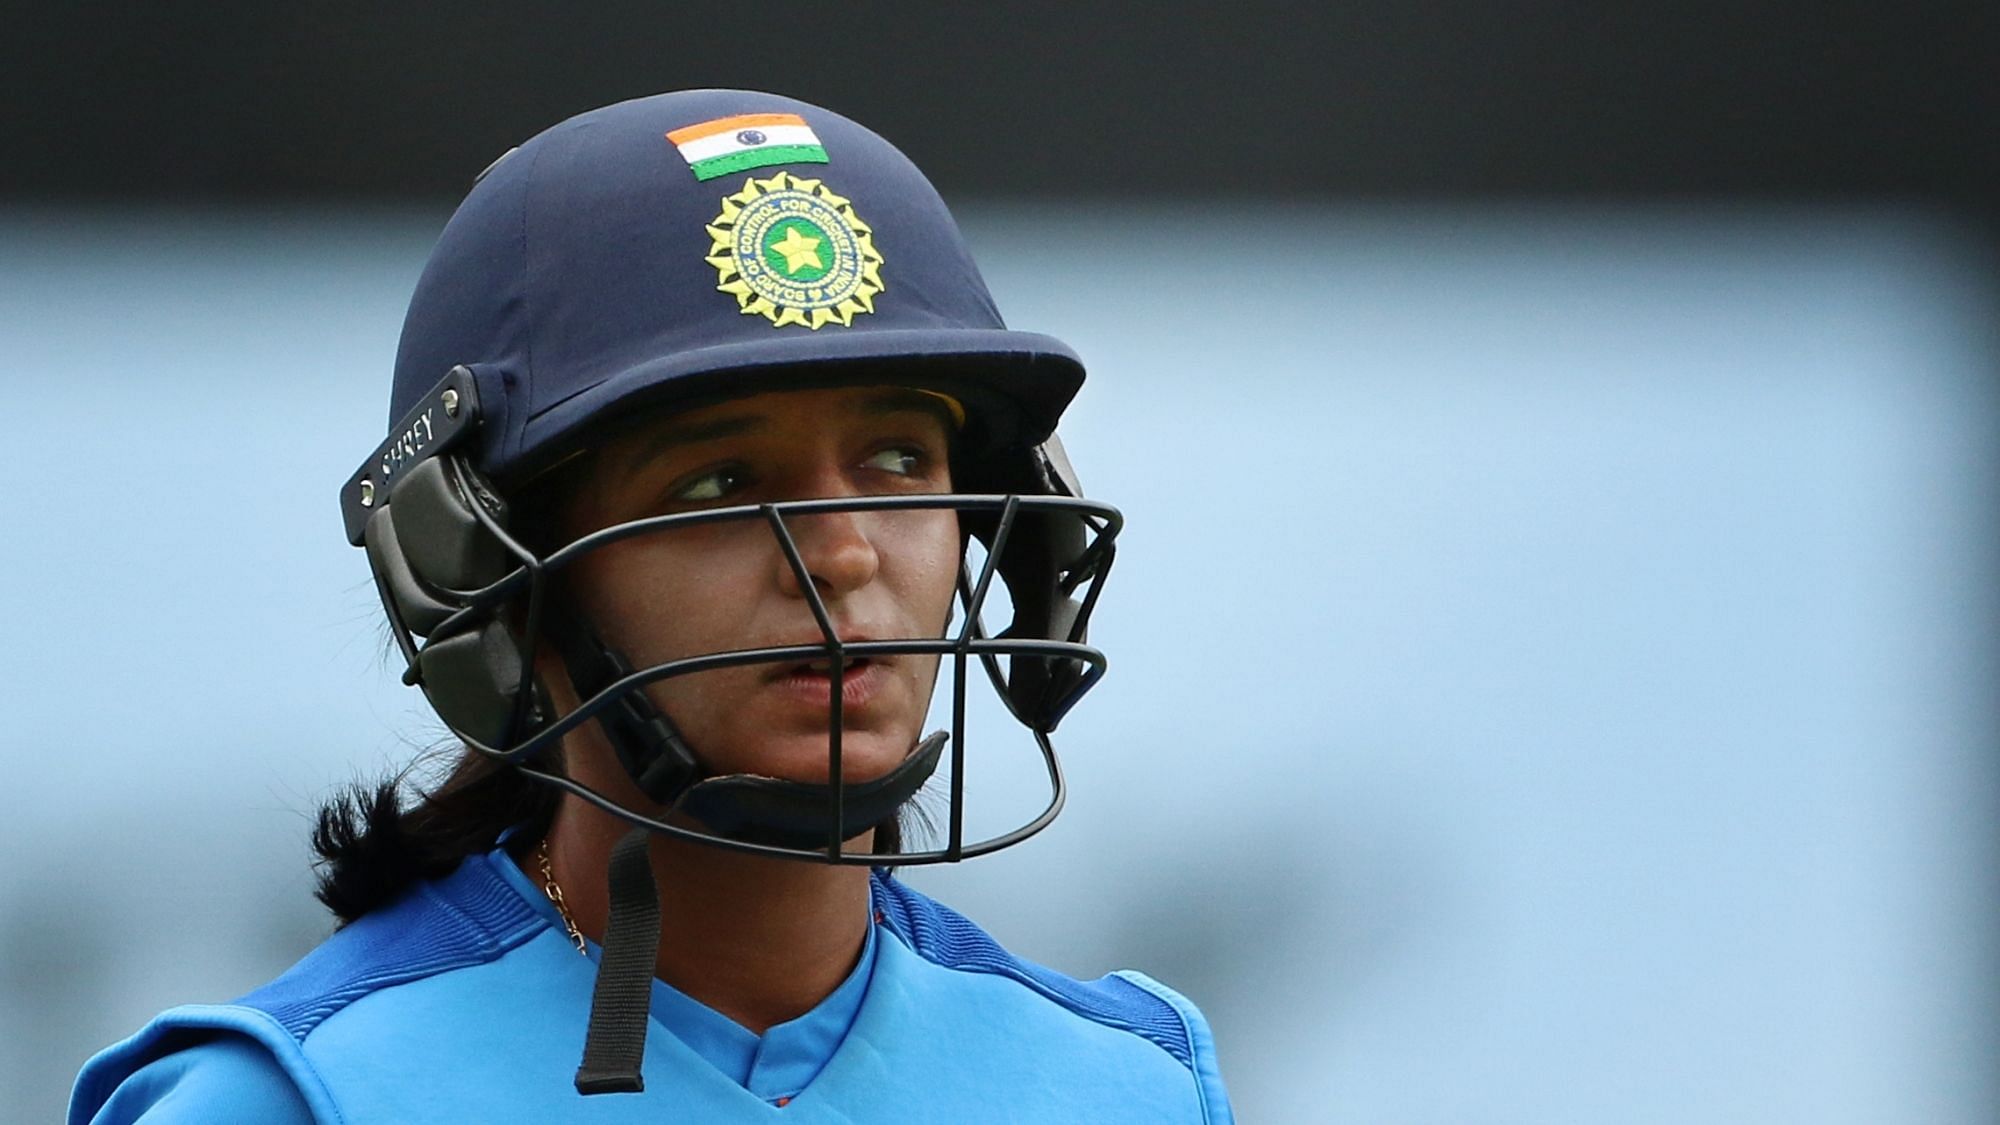 Harmanpreet Kaur has become the fifth Indian to play in 100 women’s ODI matches.